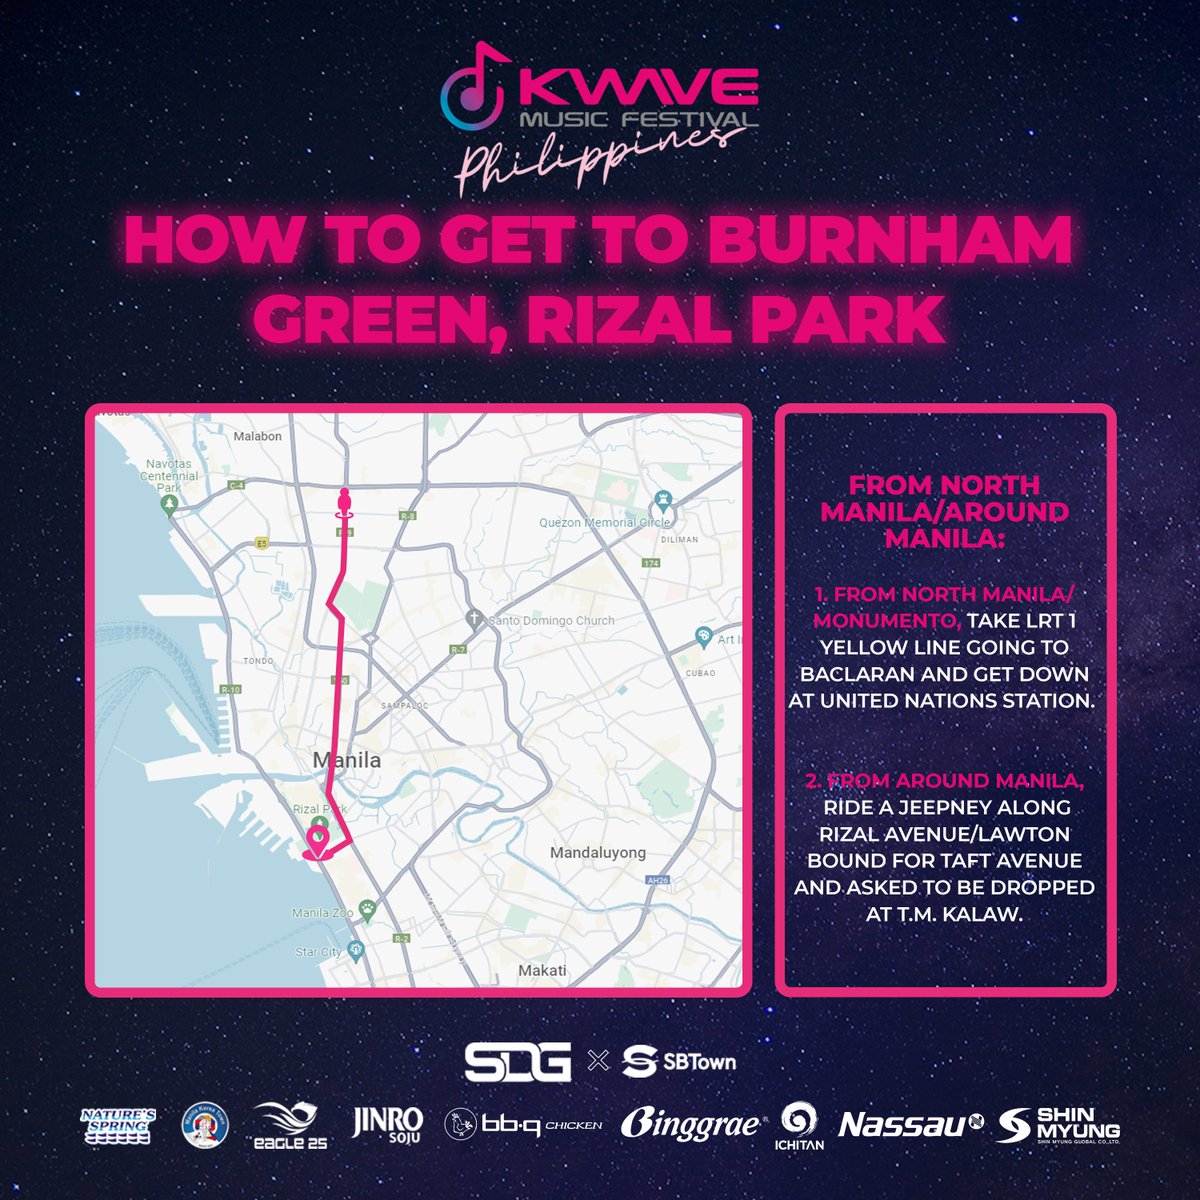 Never get lost, KWAVERS! 🧏🏻

Here's the map guide on how to get to Burnham Green. 🗺

Safe travels and see you on May 11! 👐🏻

#THEBOYZ #fromis_9 #PLUUS #YGIG #YARA #KAIA #KWAVEPH #AbsolutelyLibre #KWAVEMusicFestival #BadmintonAsia #KWAVE